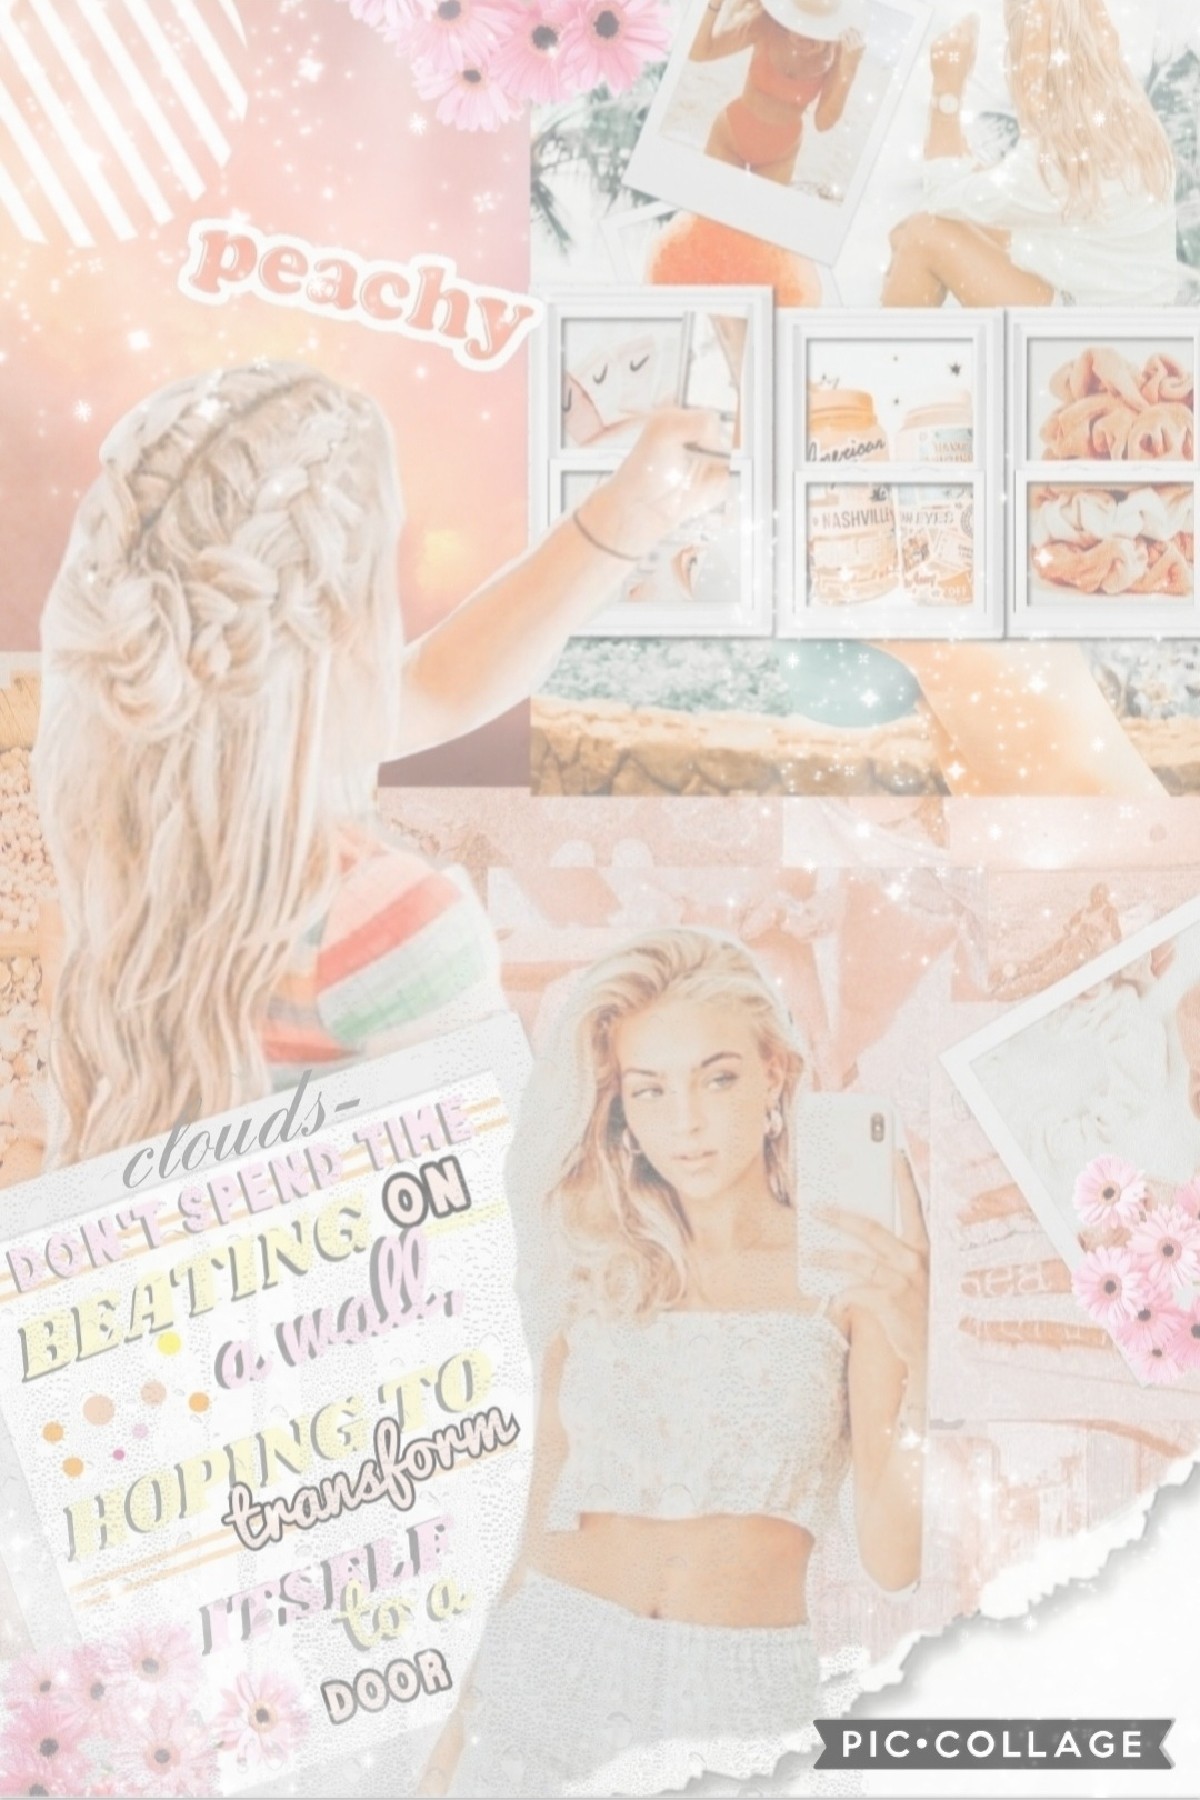                💗 tap 💗

   hii! this post took me FOREVER 😭 and pc kept on crashing 🙄 i had to redo the text at least 6 times, hope you guys like this anyway!! 💗
       inspo creds: meandmeonly!! 💗
      guys go and follow dreaminghappily, they made me a 